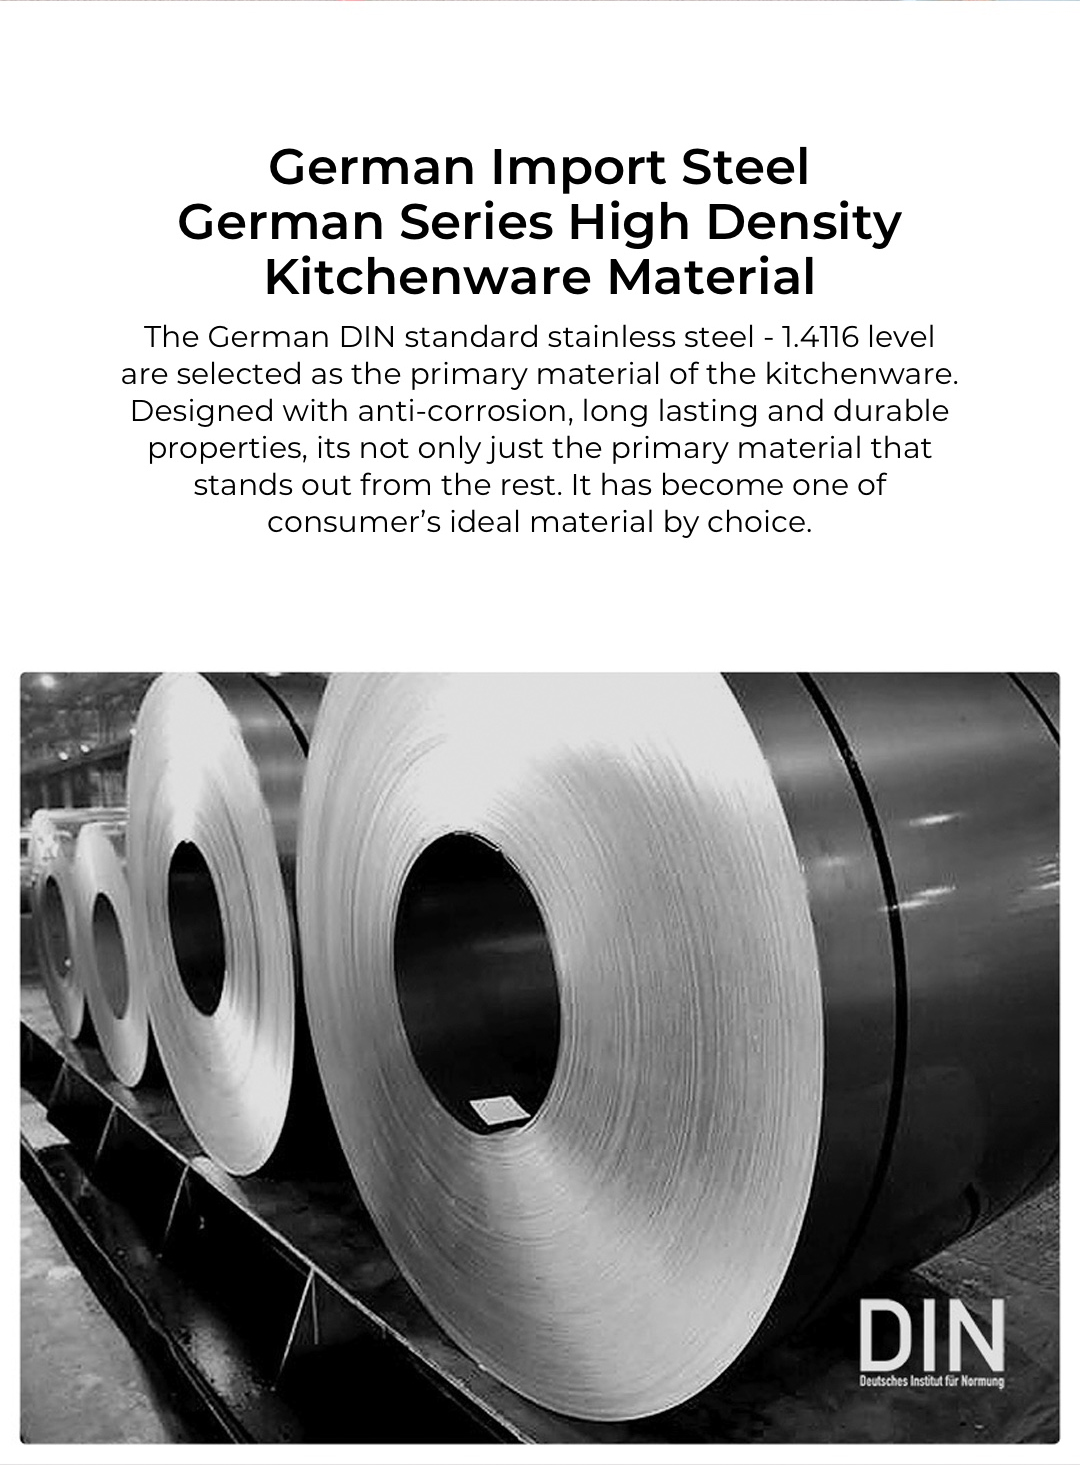 The German DIN standard stainless steel - 1.4116 level are selected as the primary material of the kitchenware. Designed with anti-corrosion, long lasting and durable properties, its not only just the primary material that stands out from the rest. It has become one of consumer's ideal material by choice.